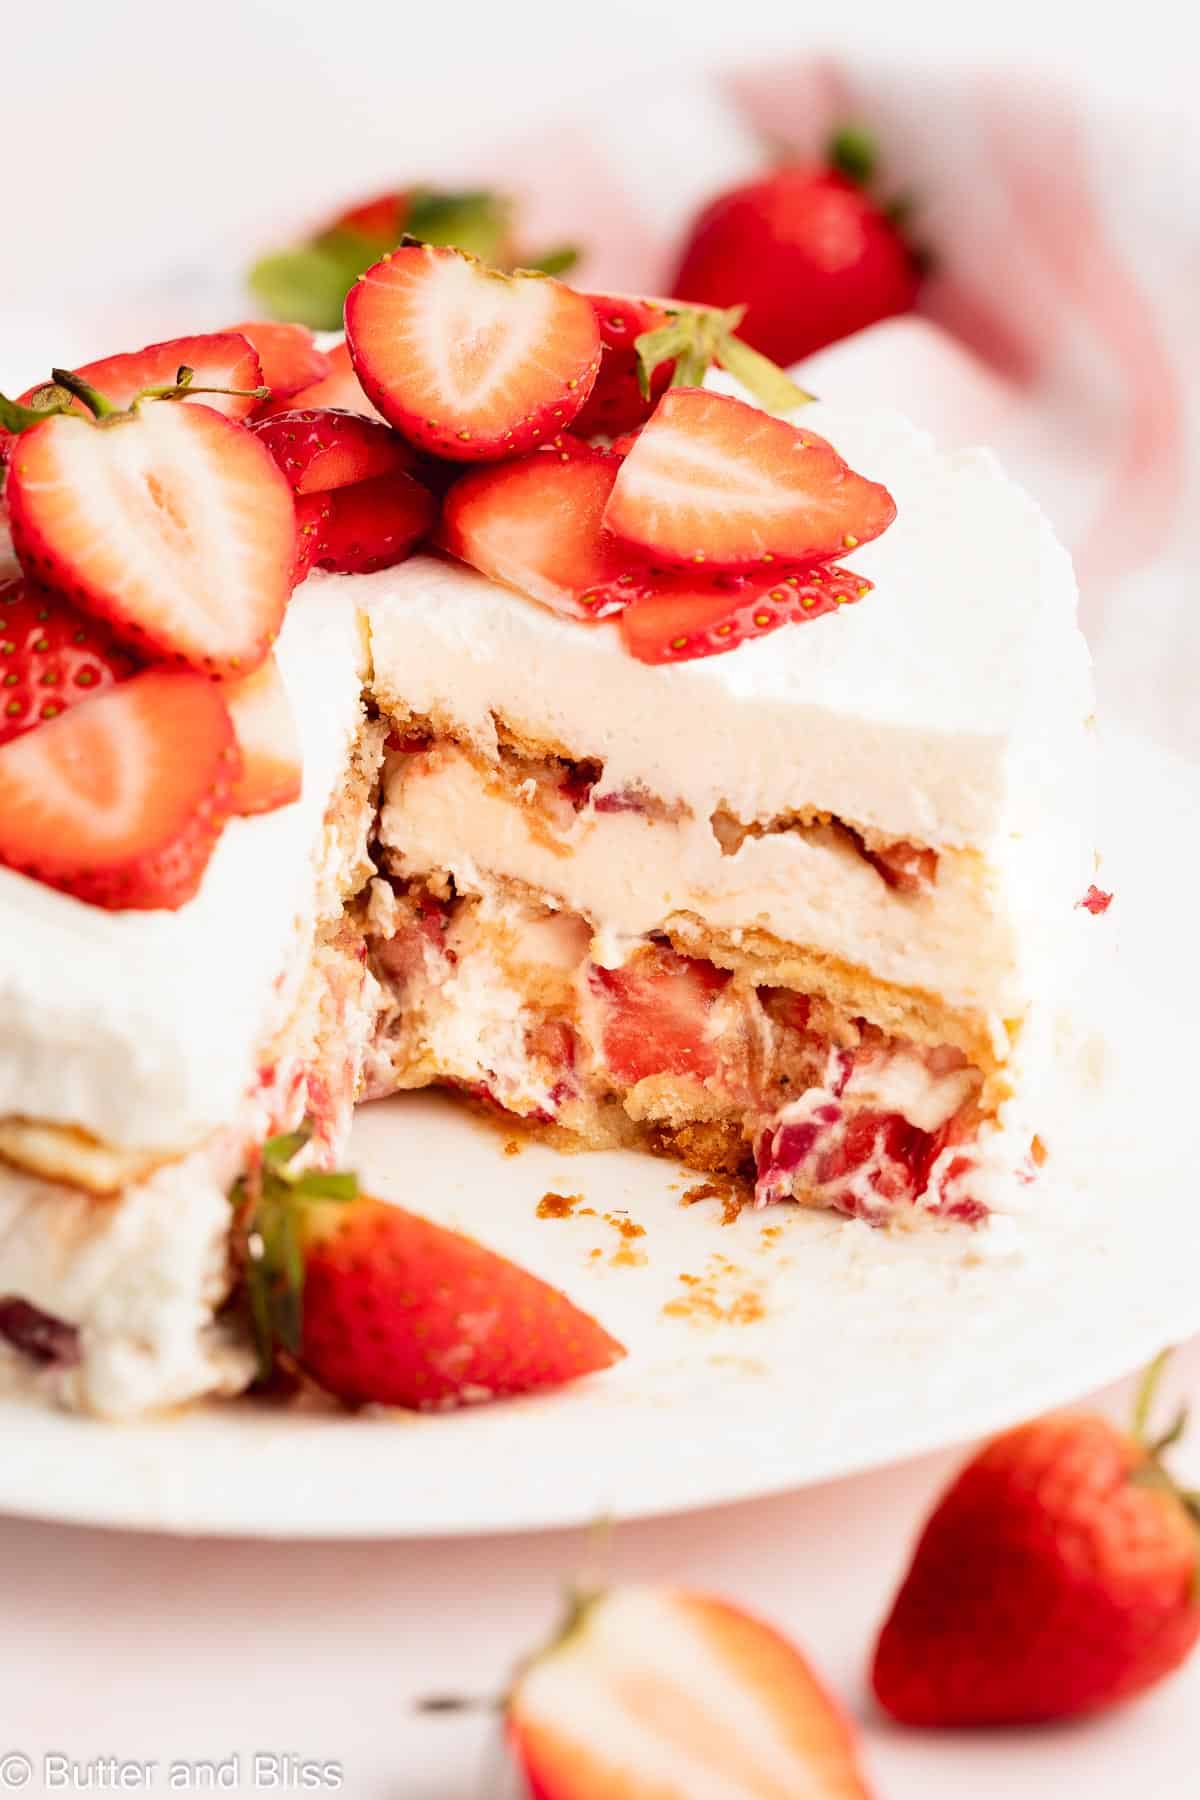 Layered inside of a strawberry icebox cake on a white platter.